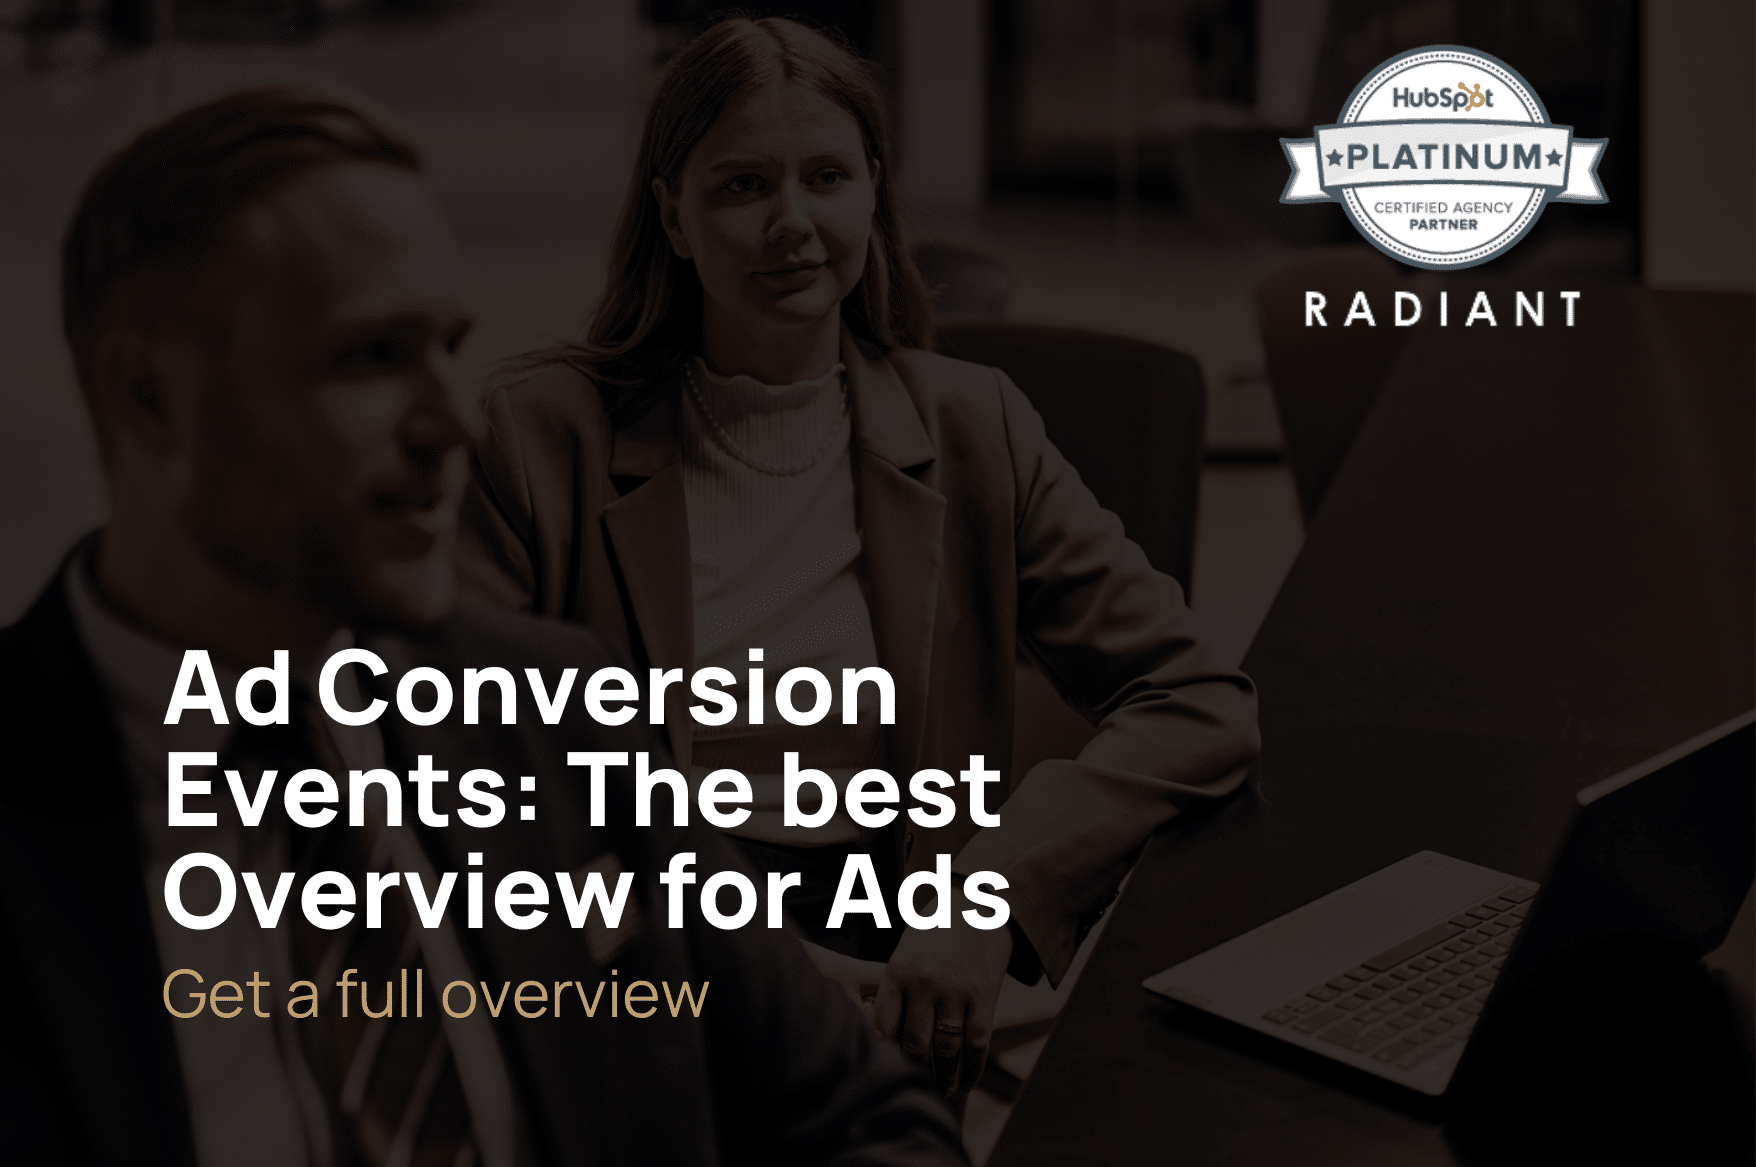 Ad Conversion Events: The best Overview for Ads